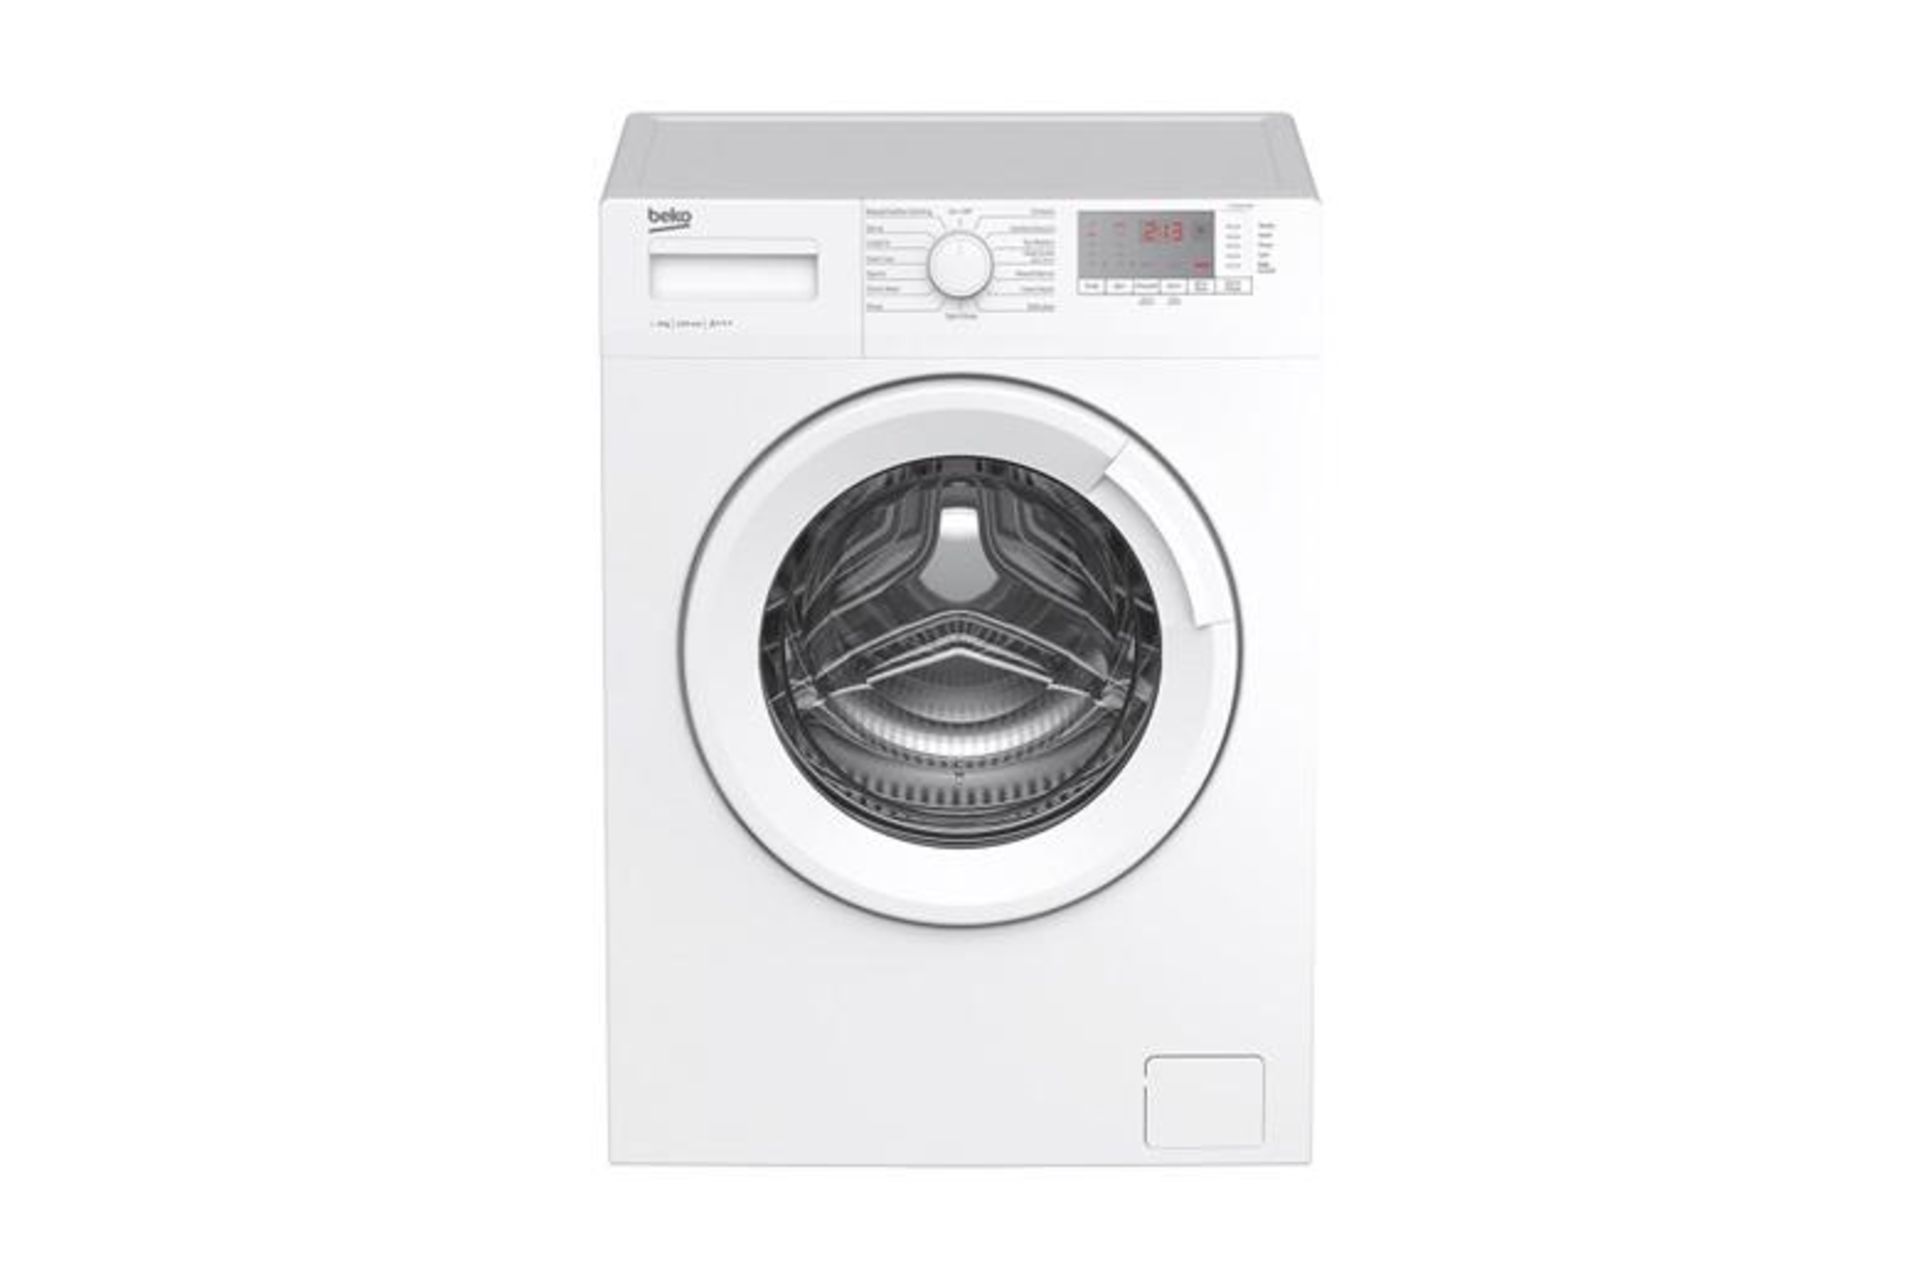 Mixed Lot of Eight Refurbished Appliances including Hoover 8KG Washing Machine in White, - Image 4 of 7